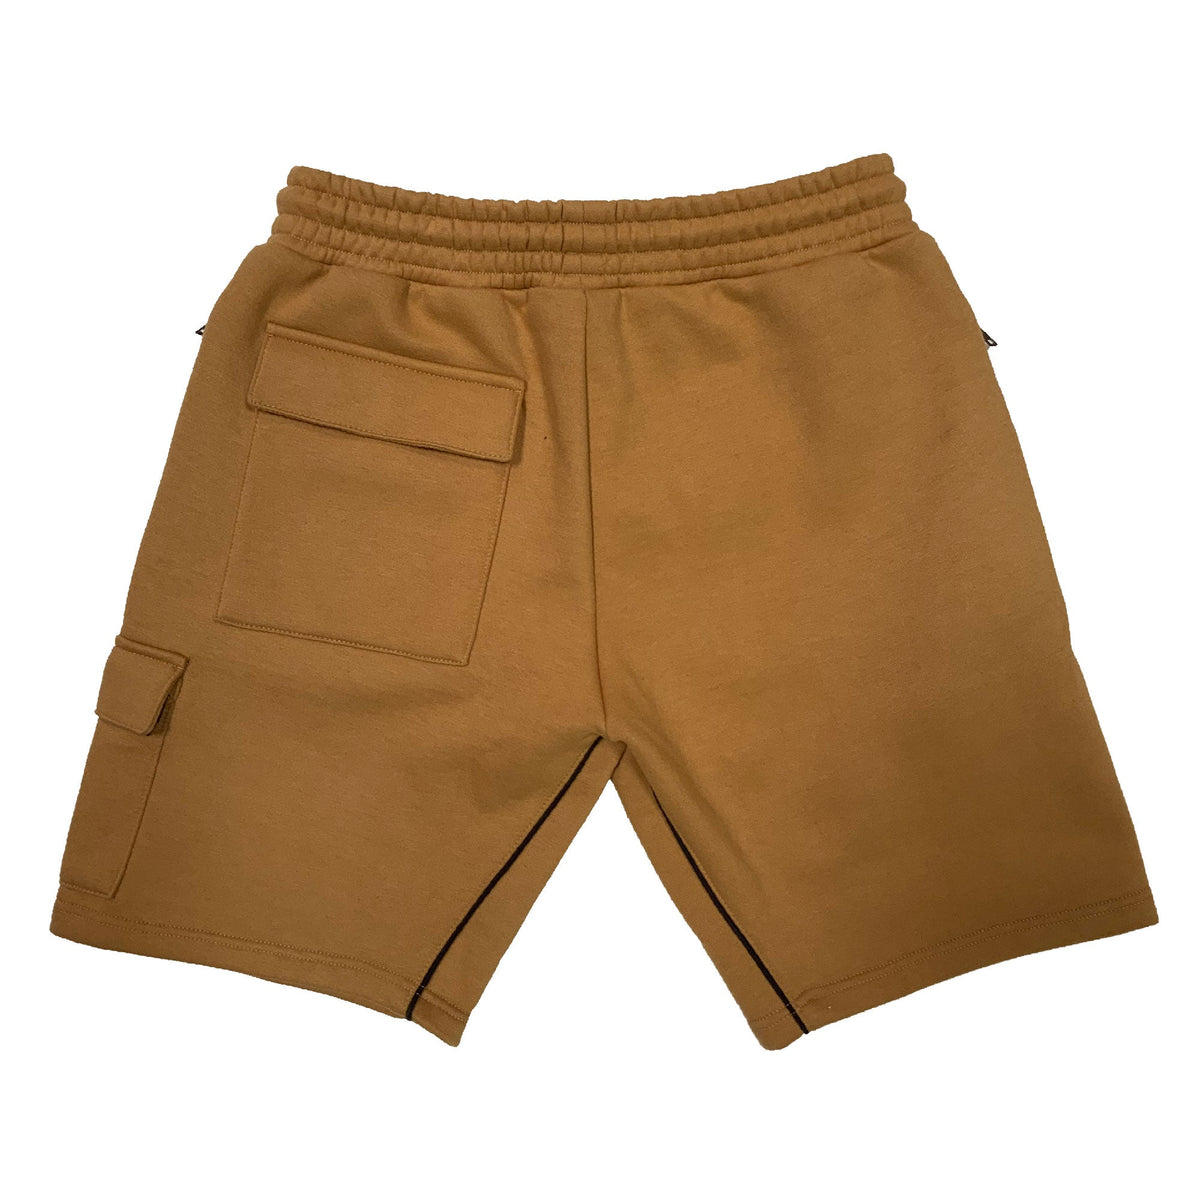 Youth Multi-Versey Compression Shorts - Courtsmith